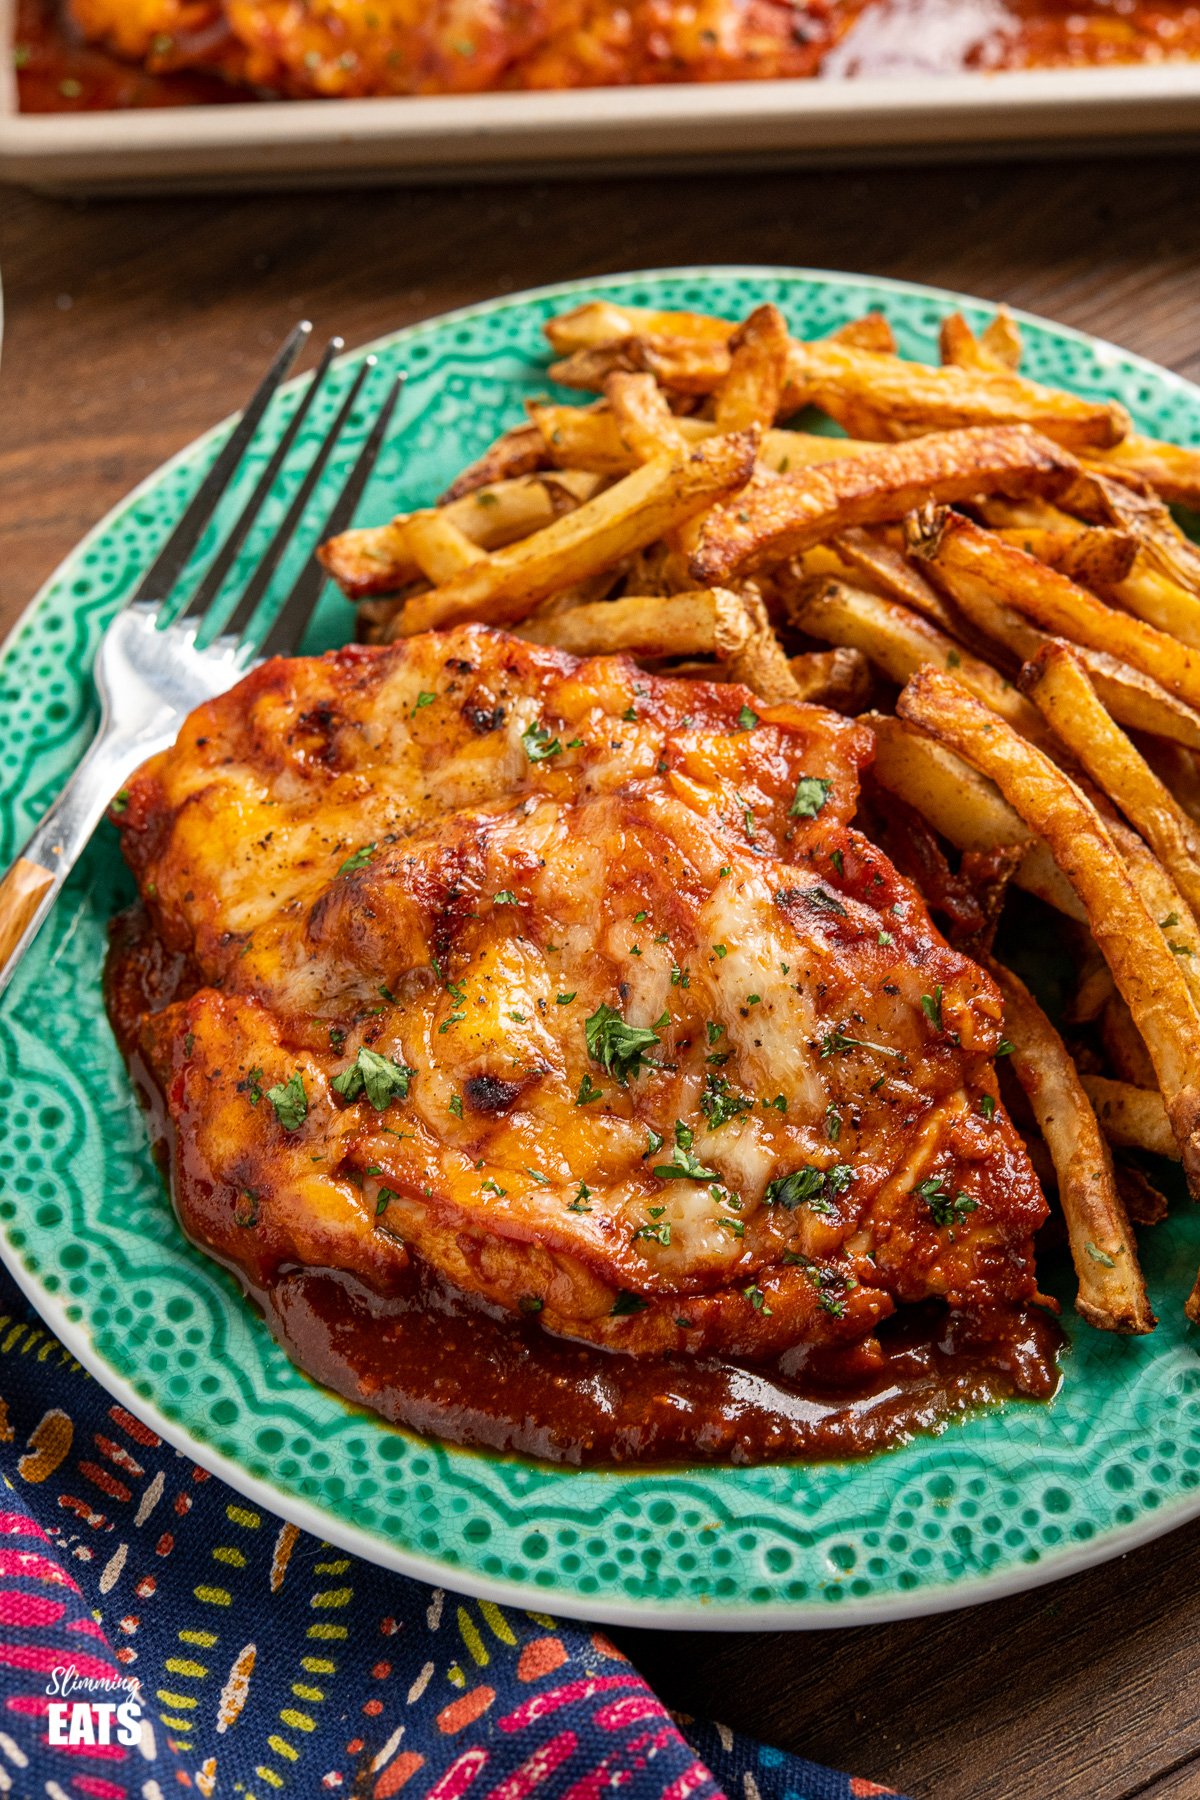 close up of Hunters chicken on teal plate with oven baked fries